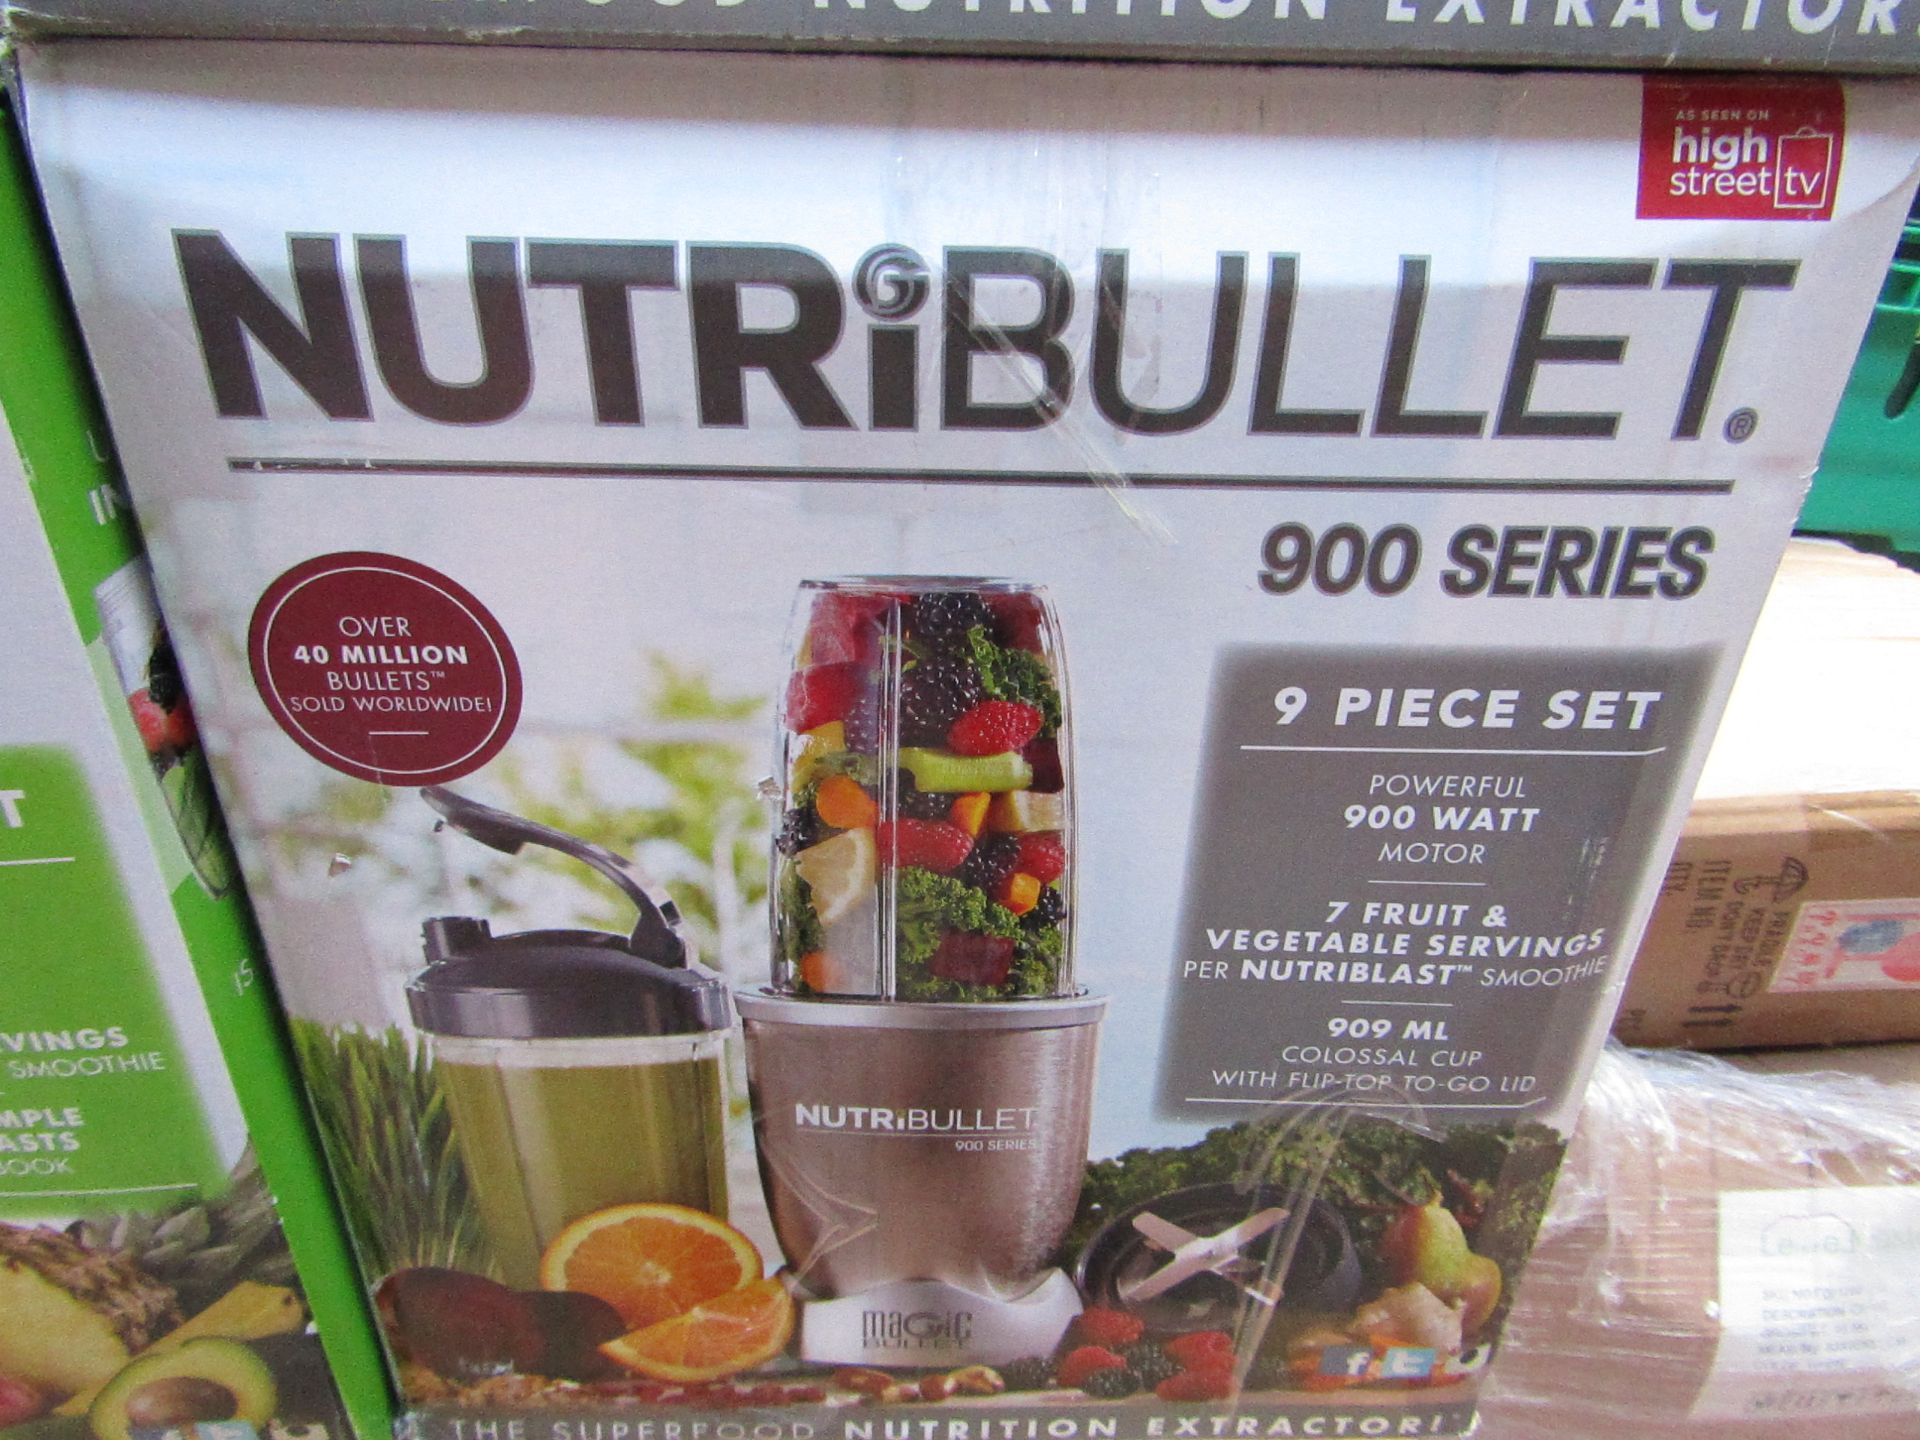 | 1x | nutribullet 900 series | unchecked and boxed | no online re-sale | Sku C5060191467353 |